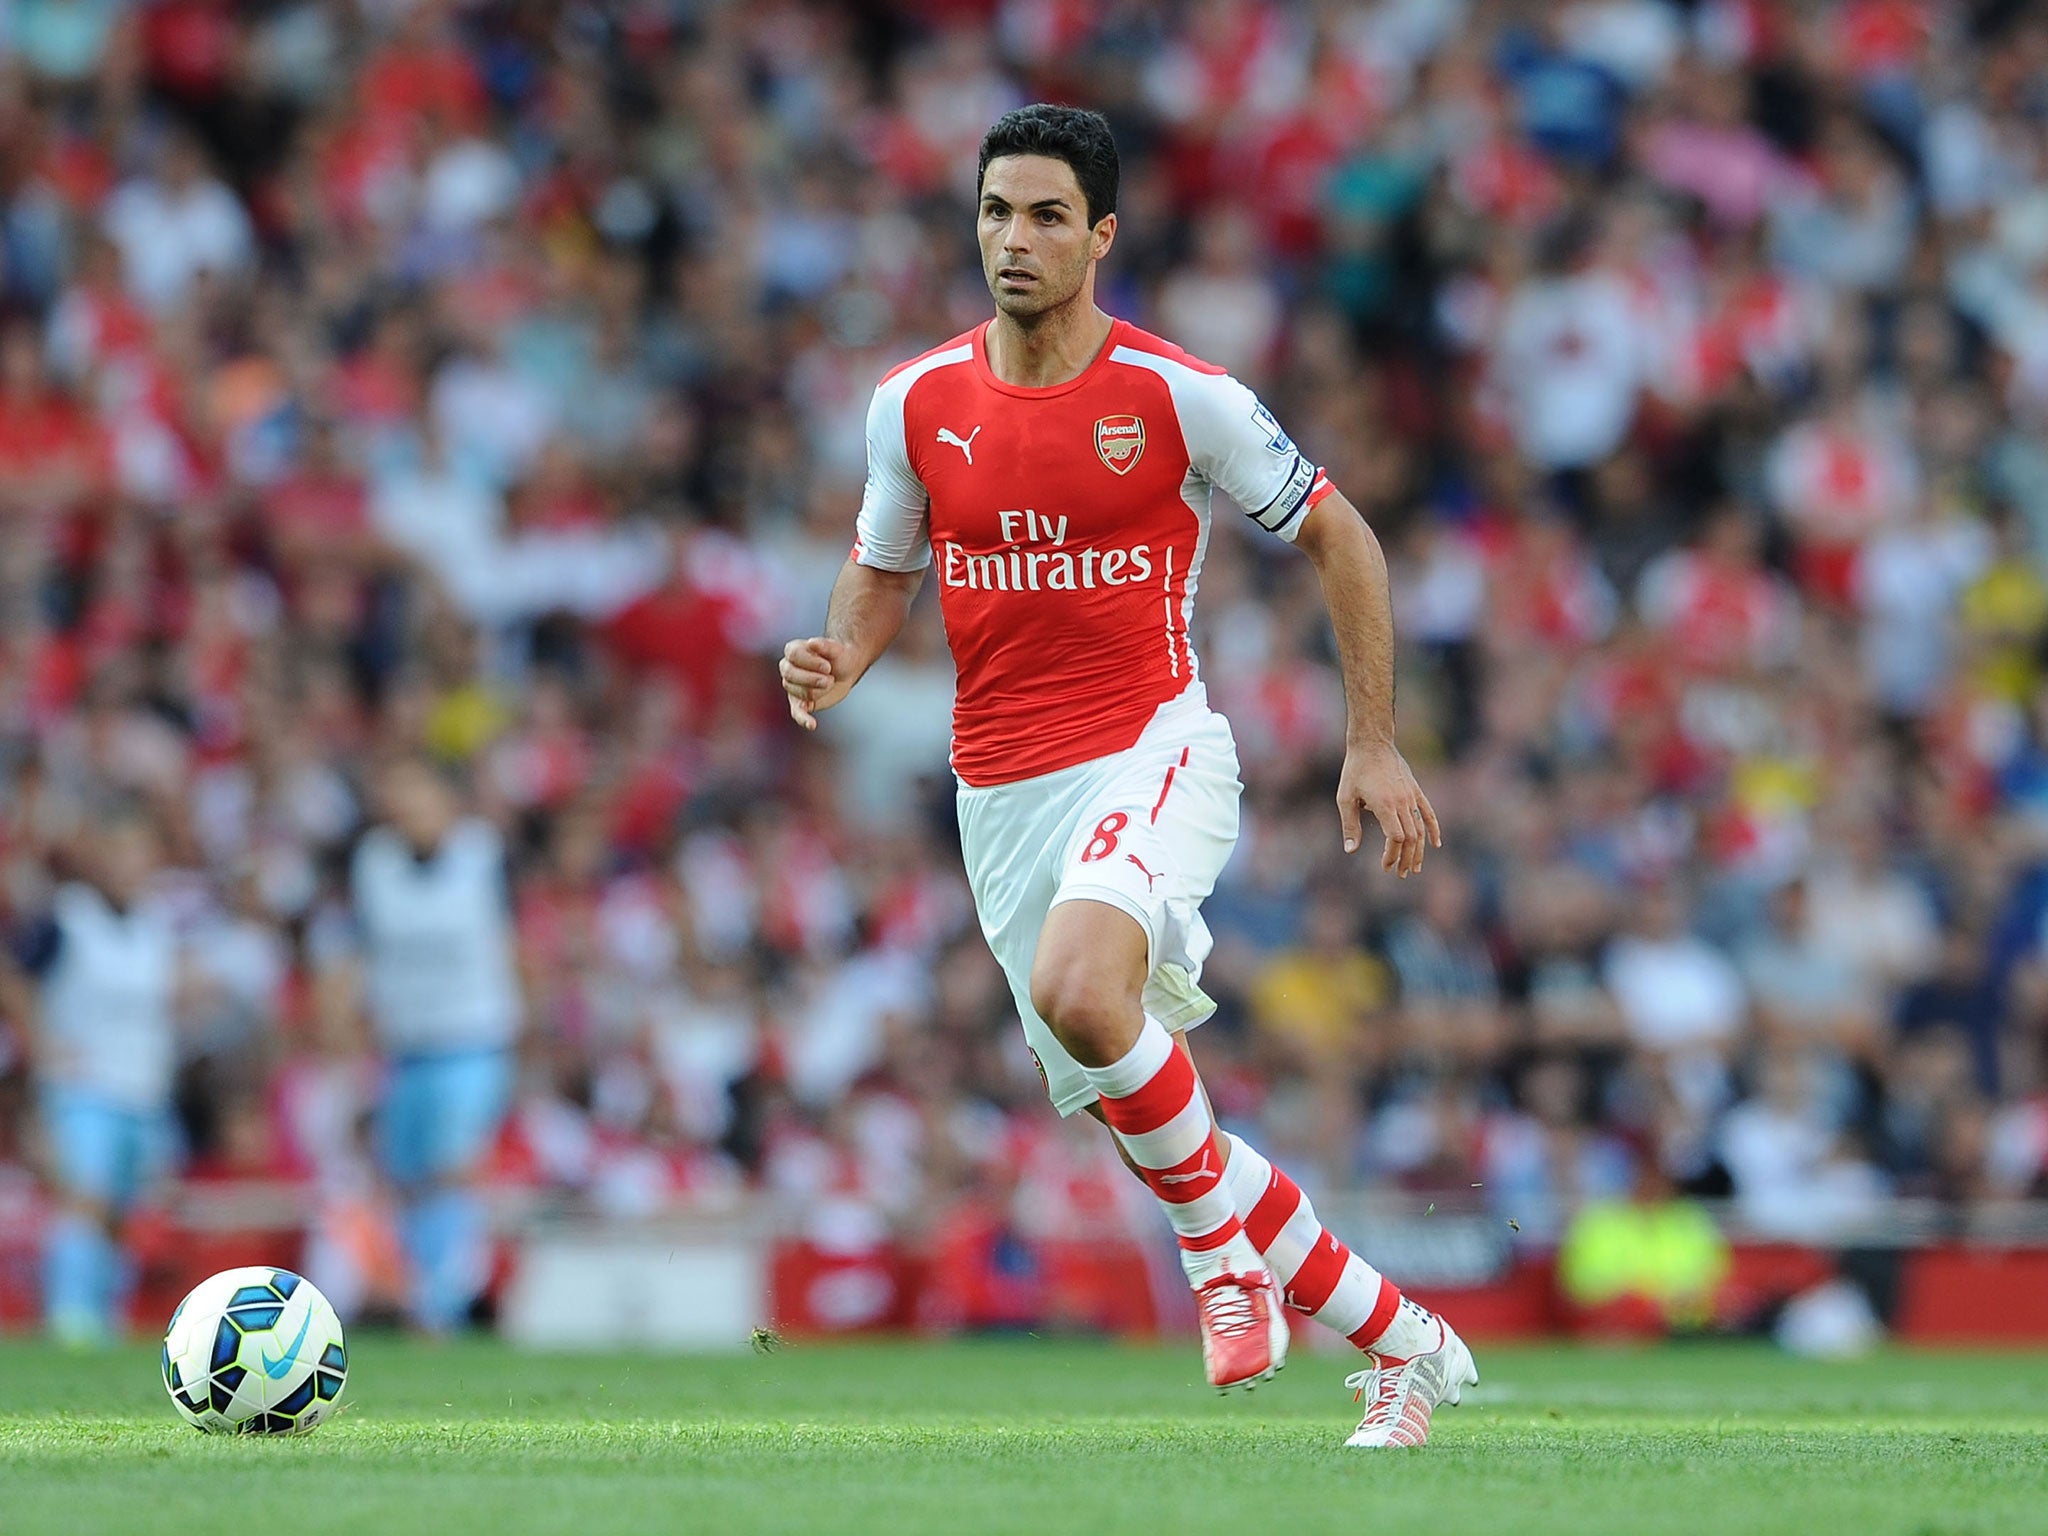 Mikel Arteta was a deadline day signing for Arsenal